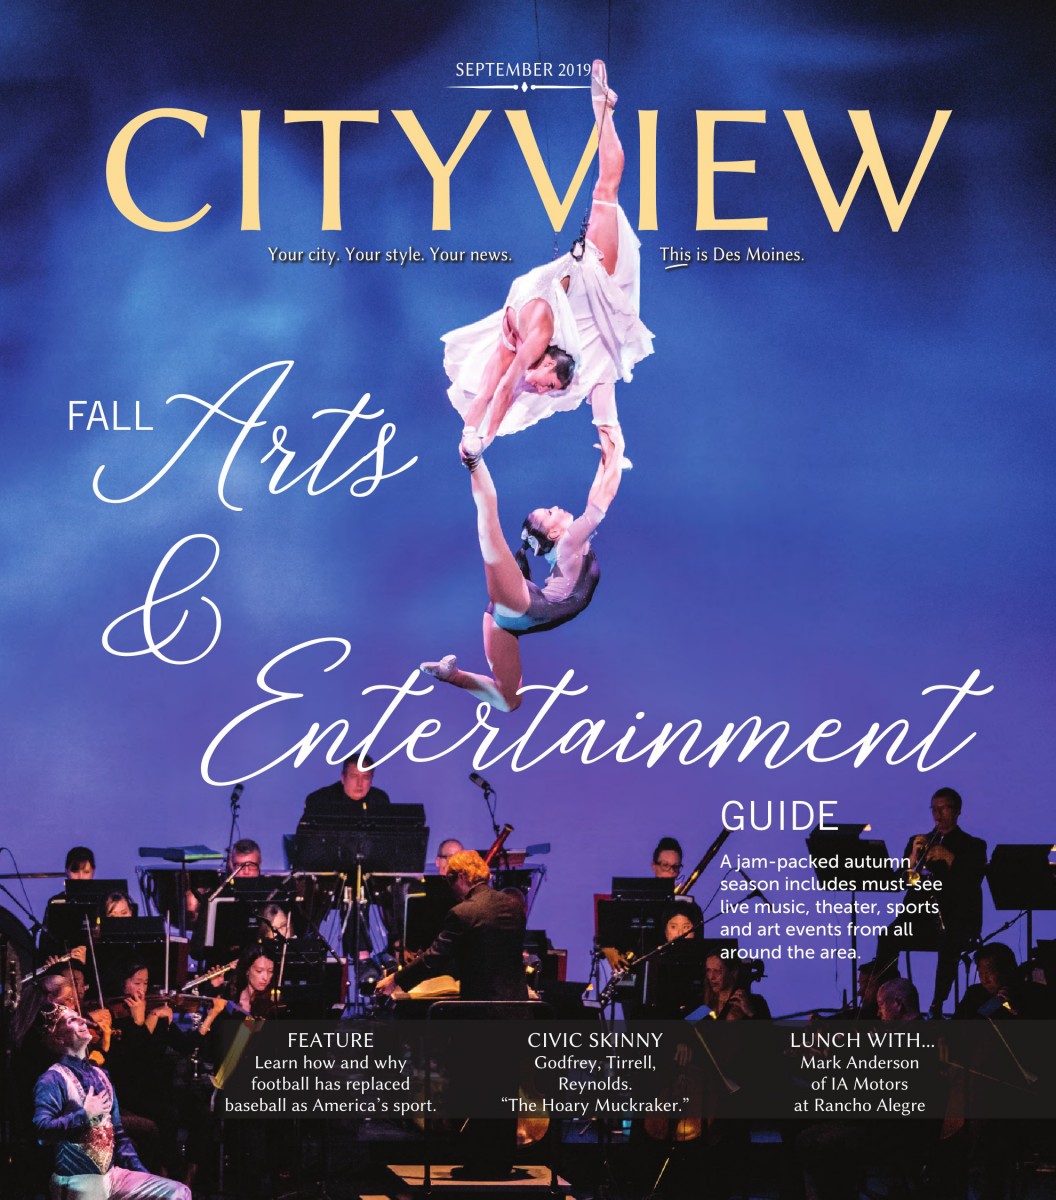 http://www.dmcityview.com/CityviewSeptember2019/files/pages/tablet/1.jpg